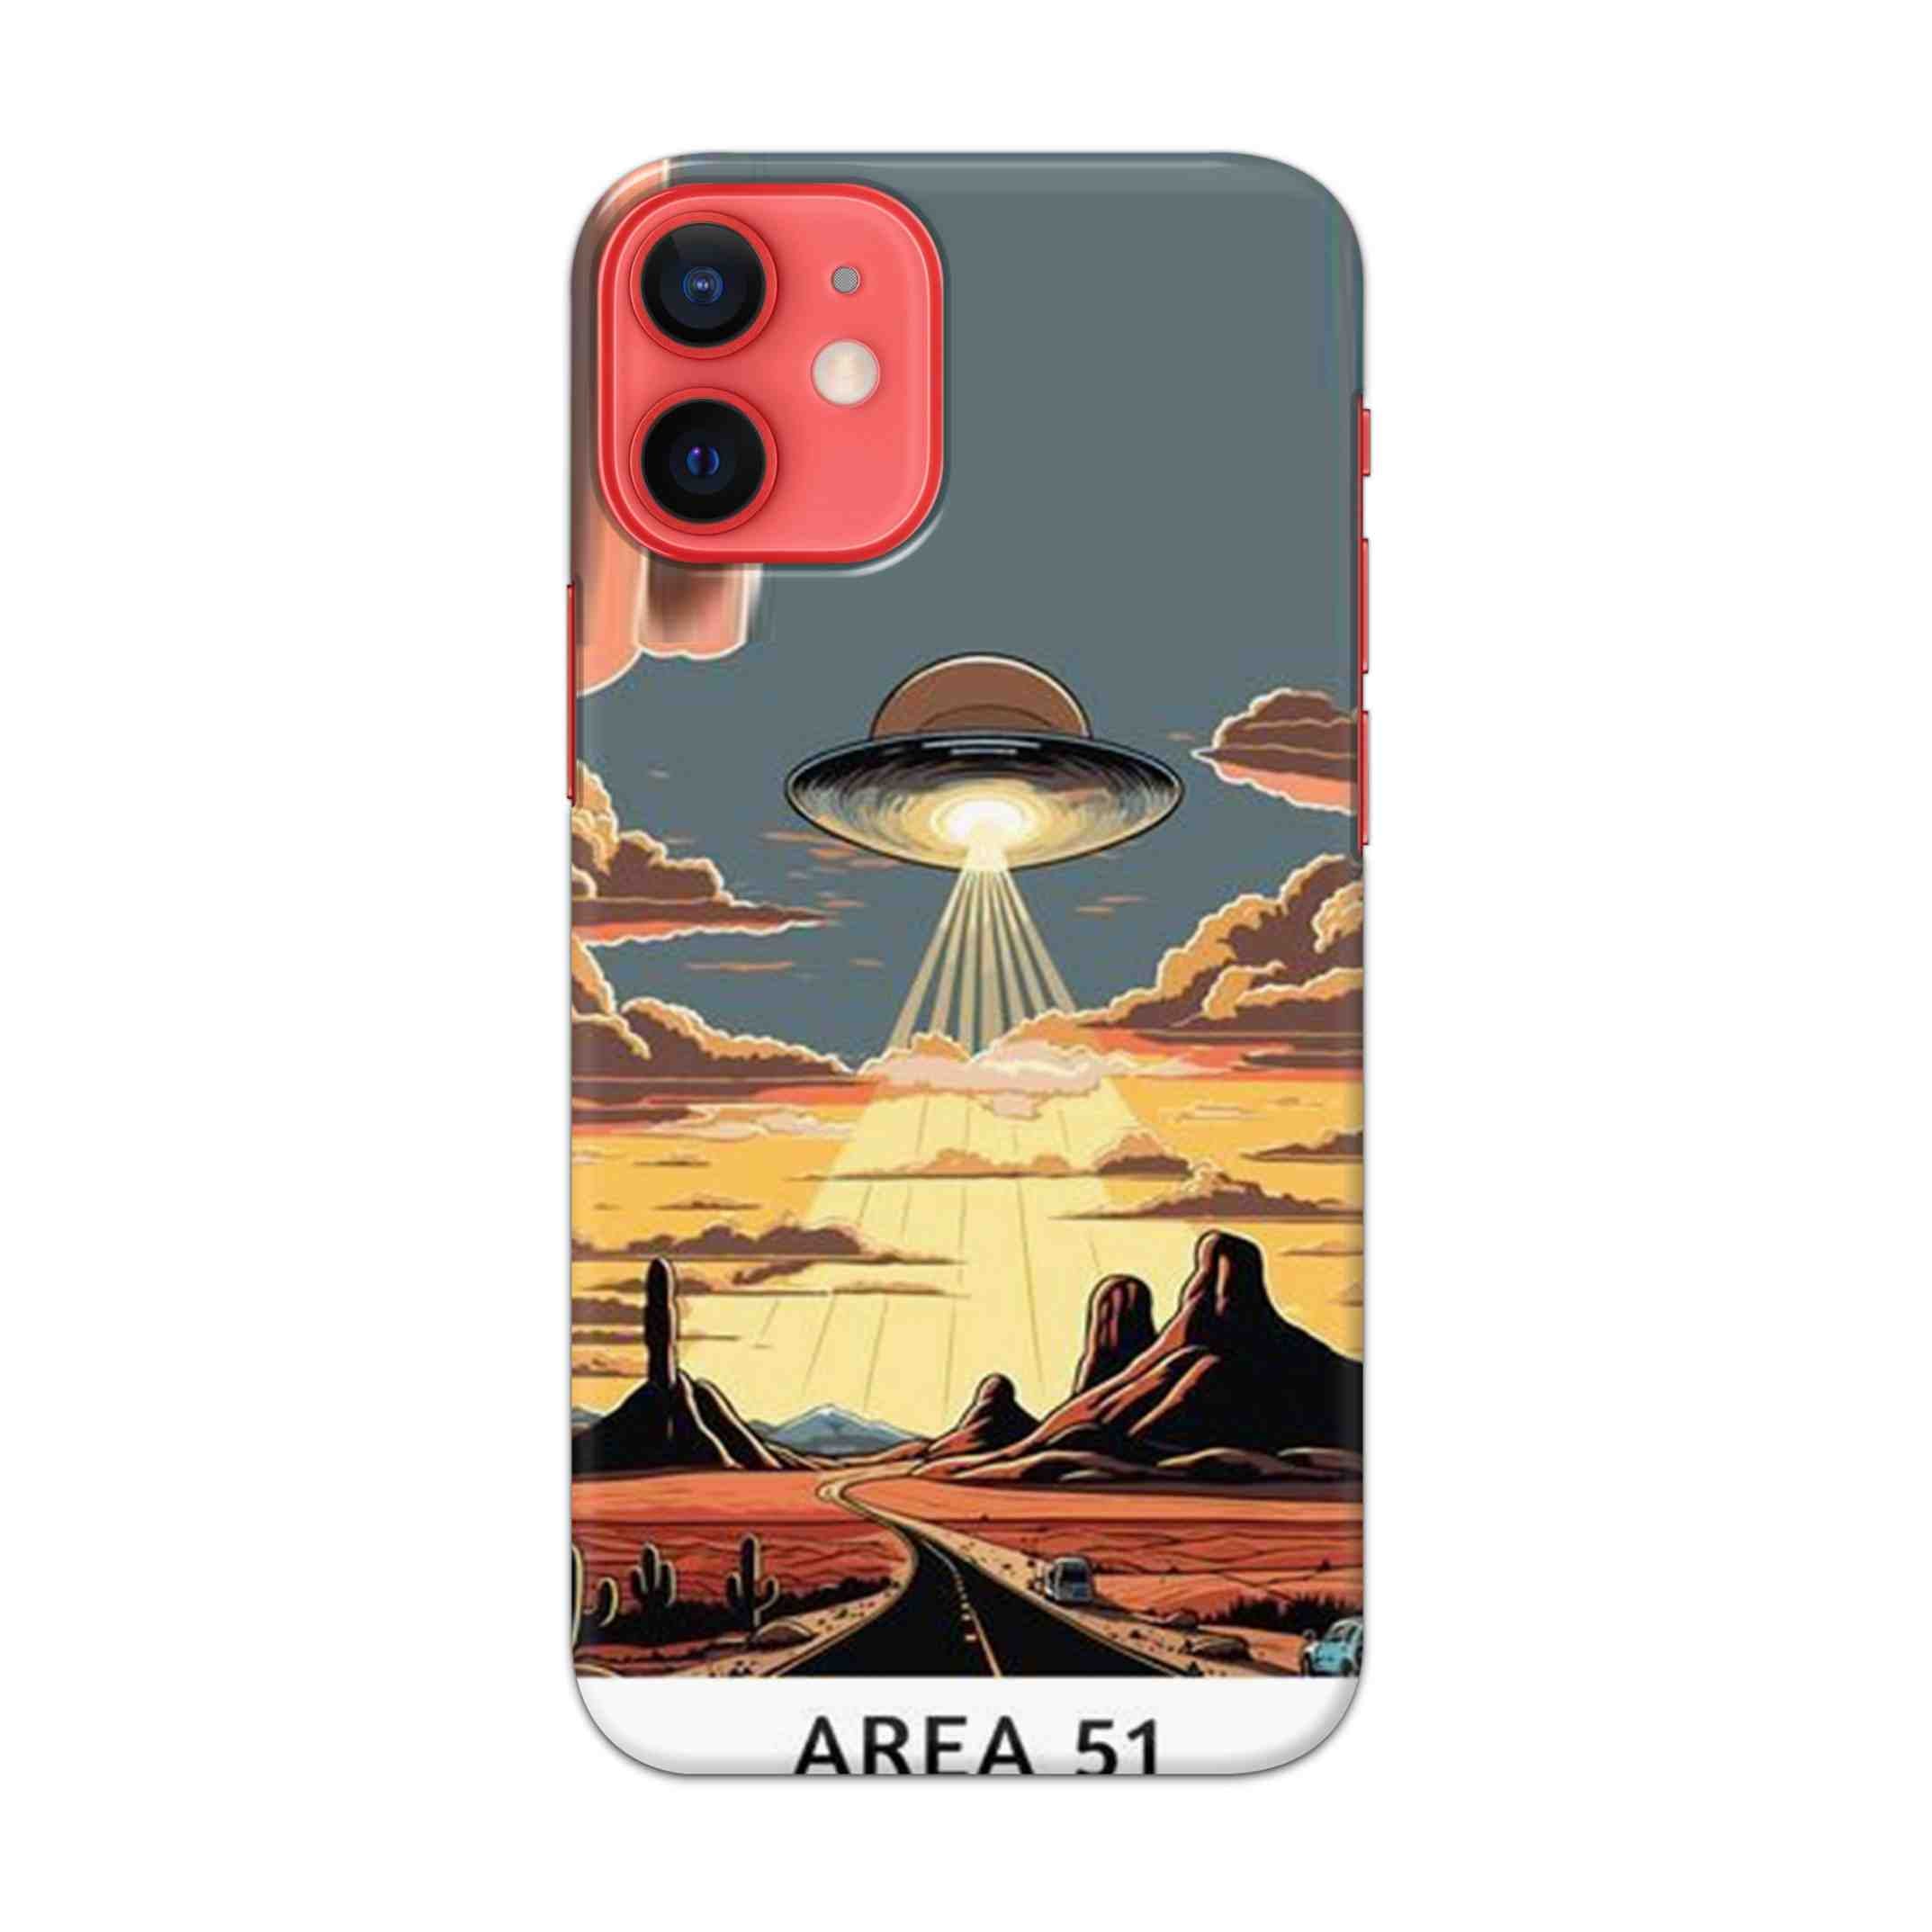 Buy Area 51 Hard Back Mobile Phone Case/Cover For Apple iPhone 12 mini Online